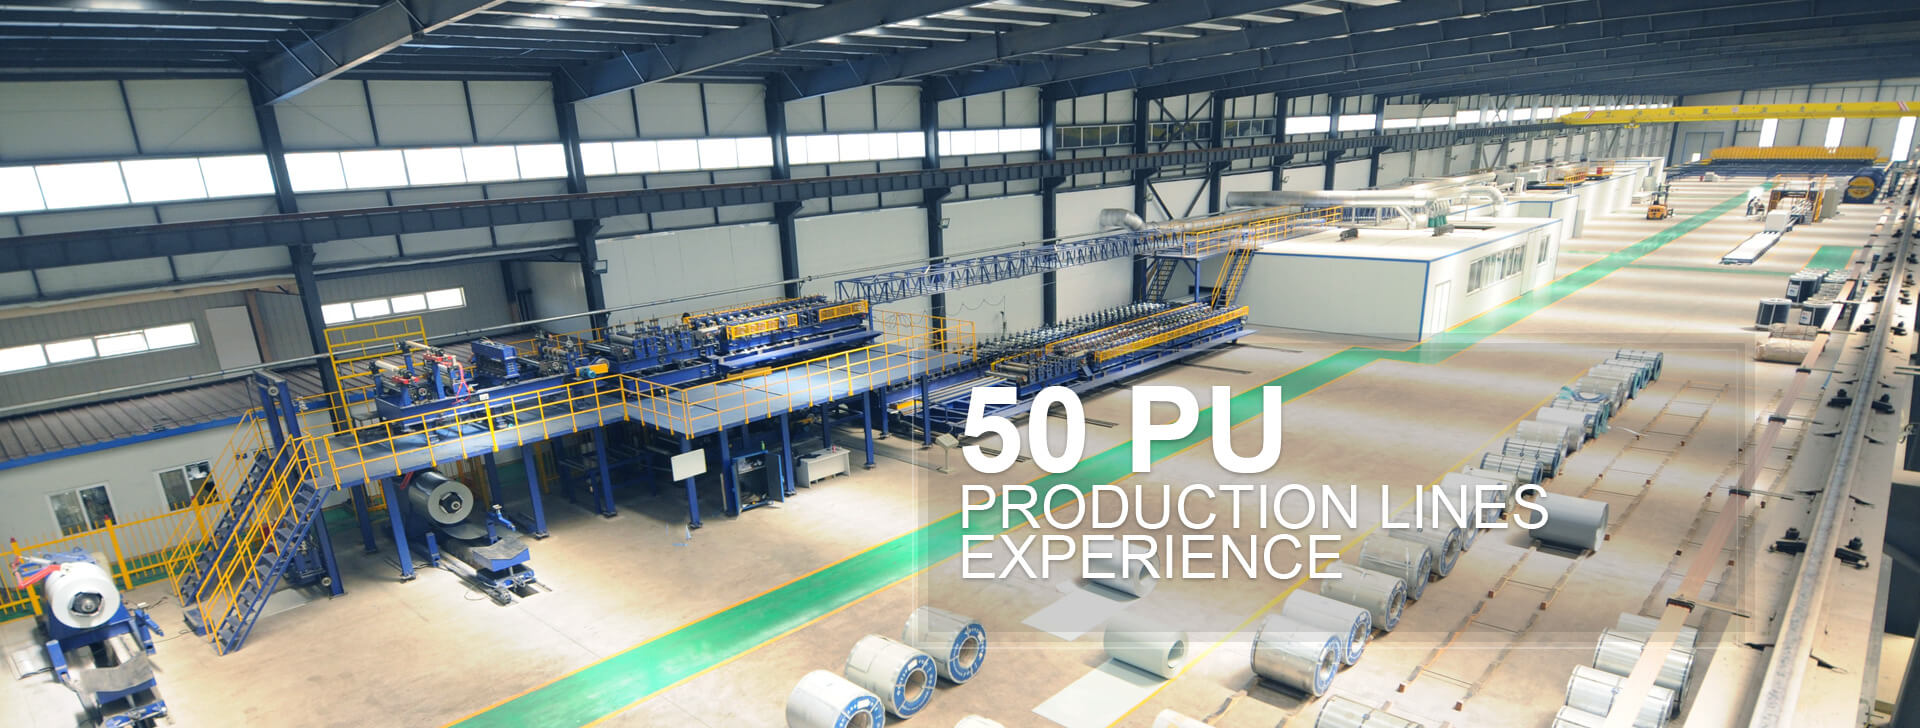 50 pu production lines